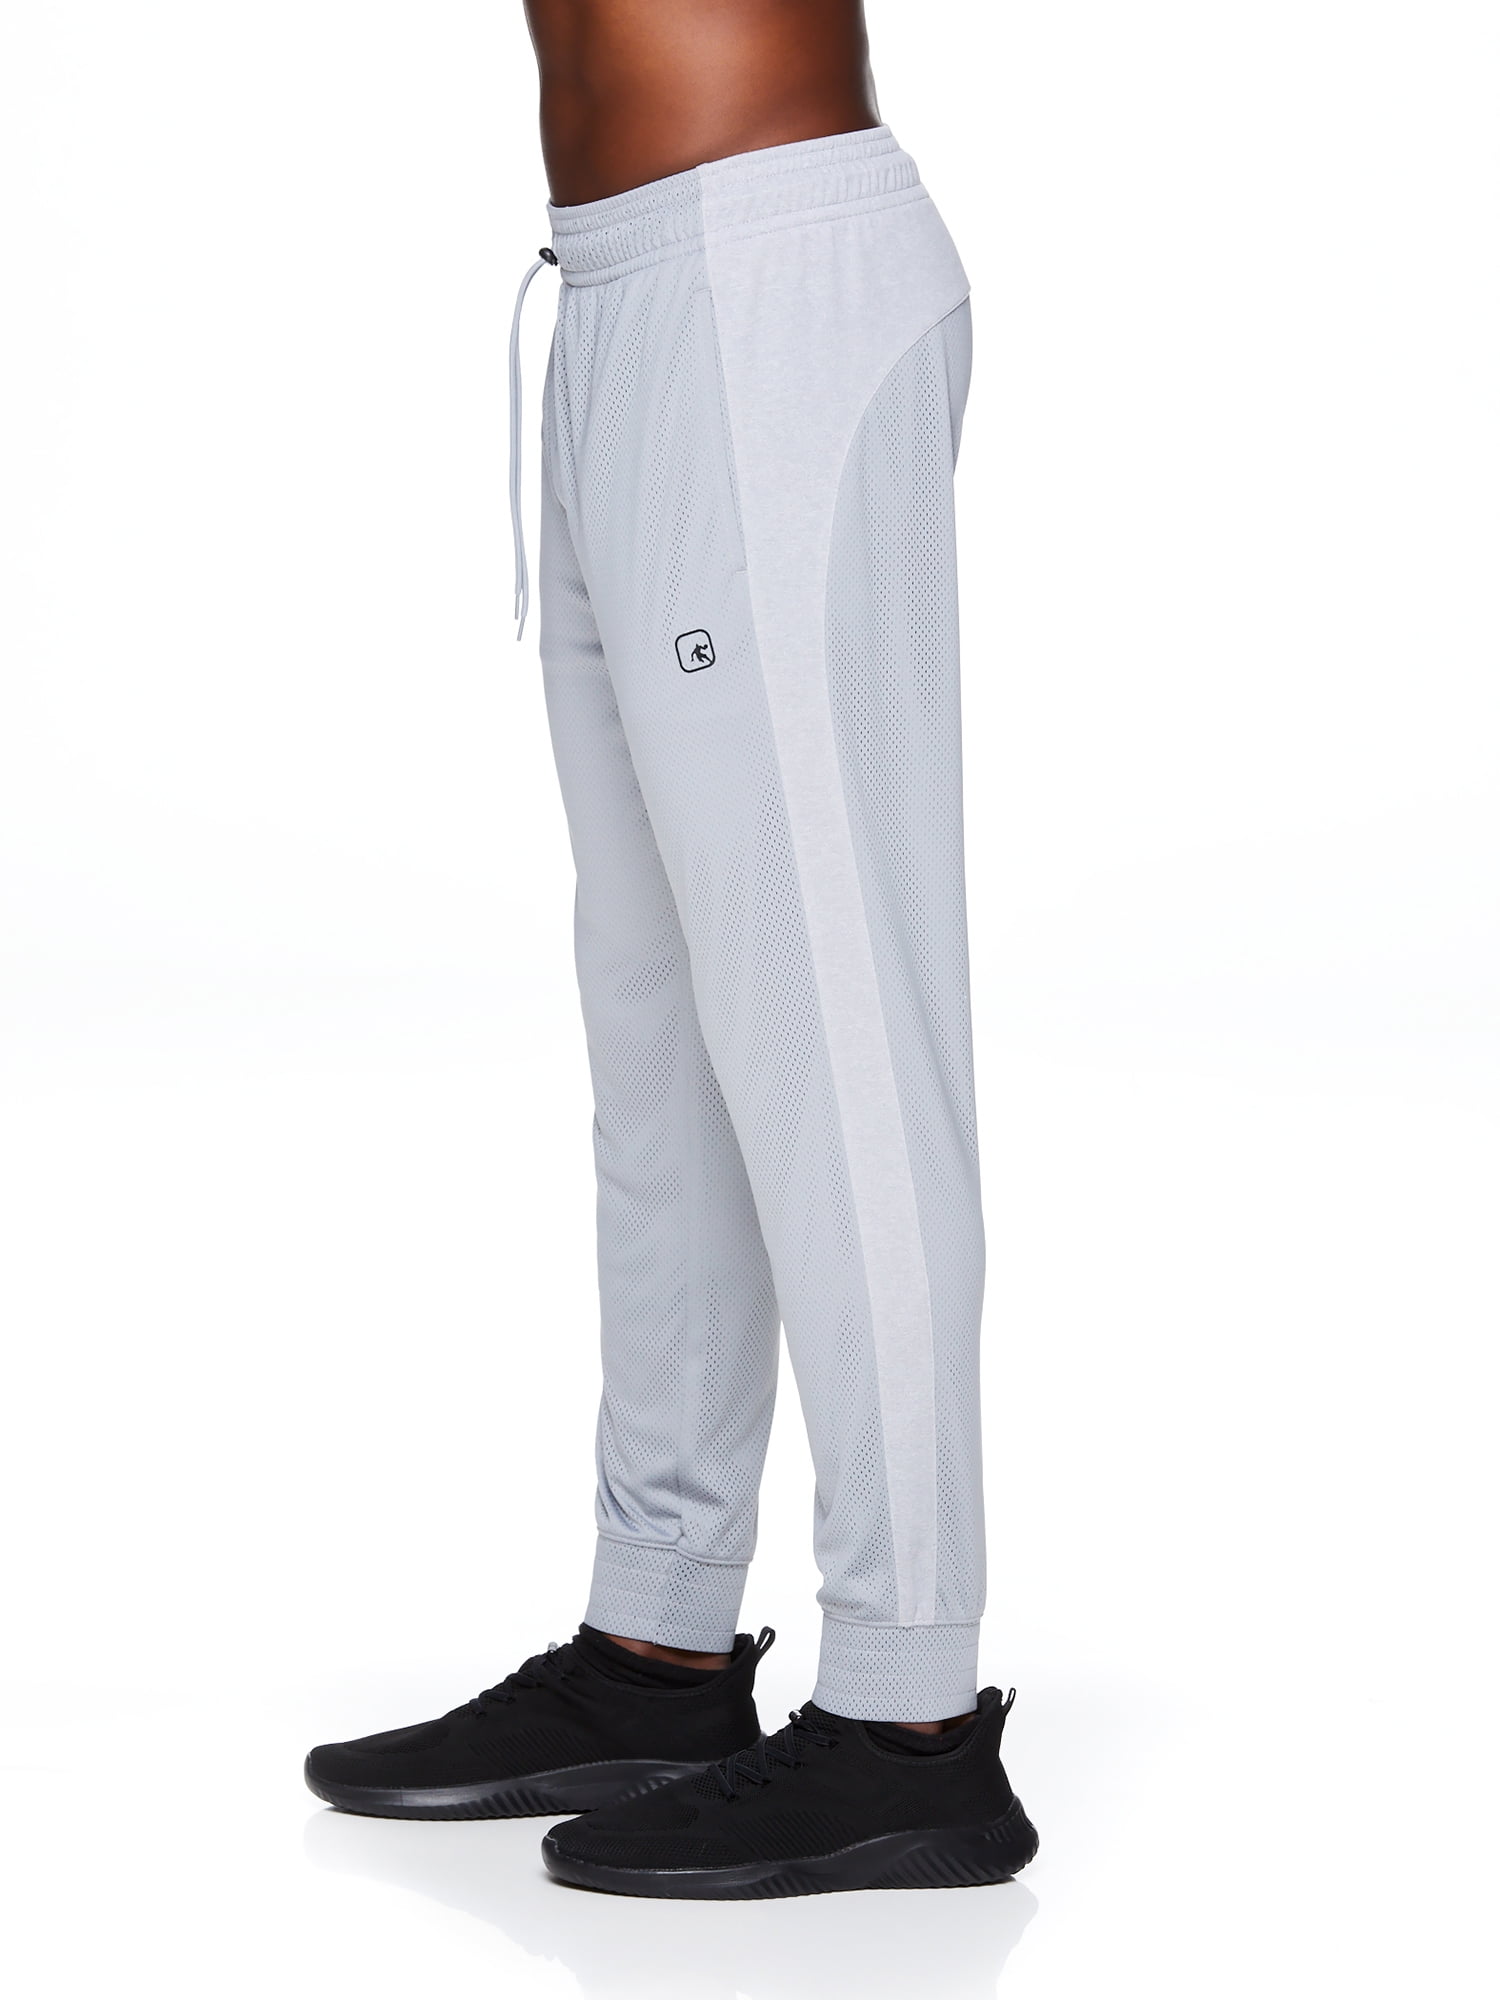 AND1 Men's and Big Men's Active Turnover Jogger Pant, up to size 3XL